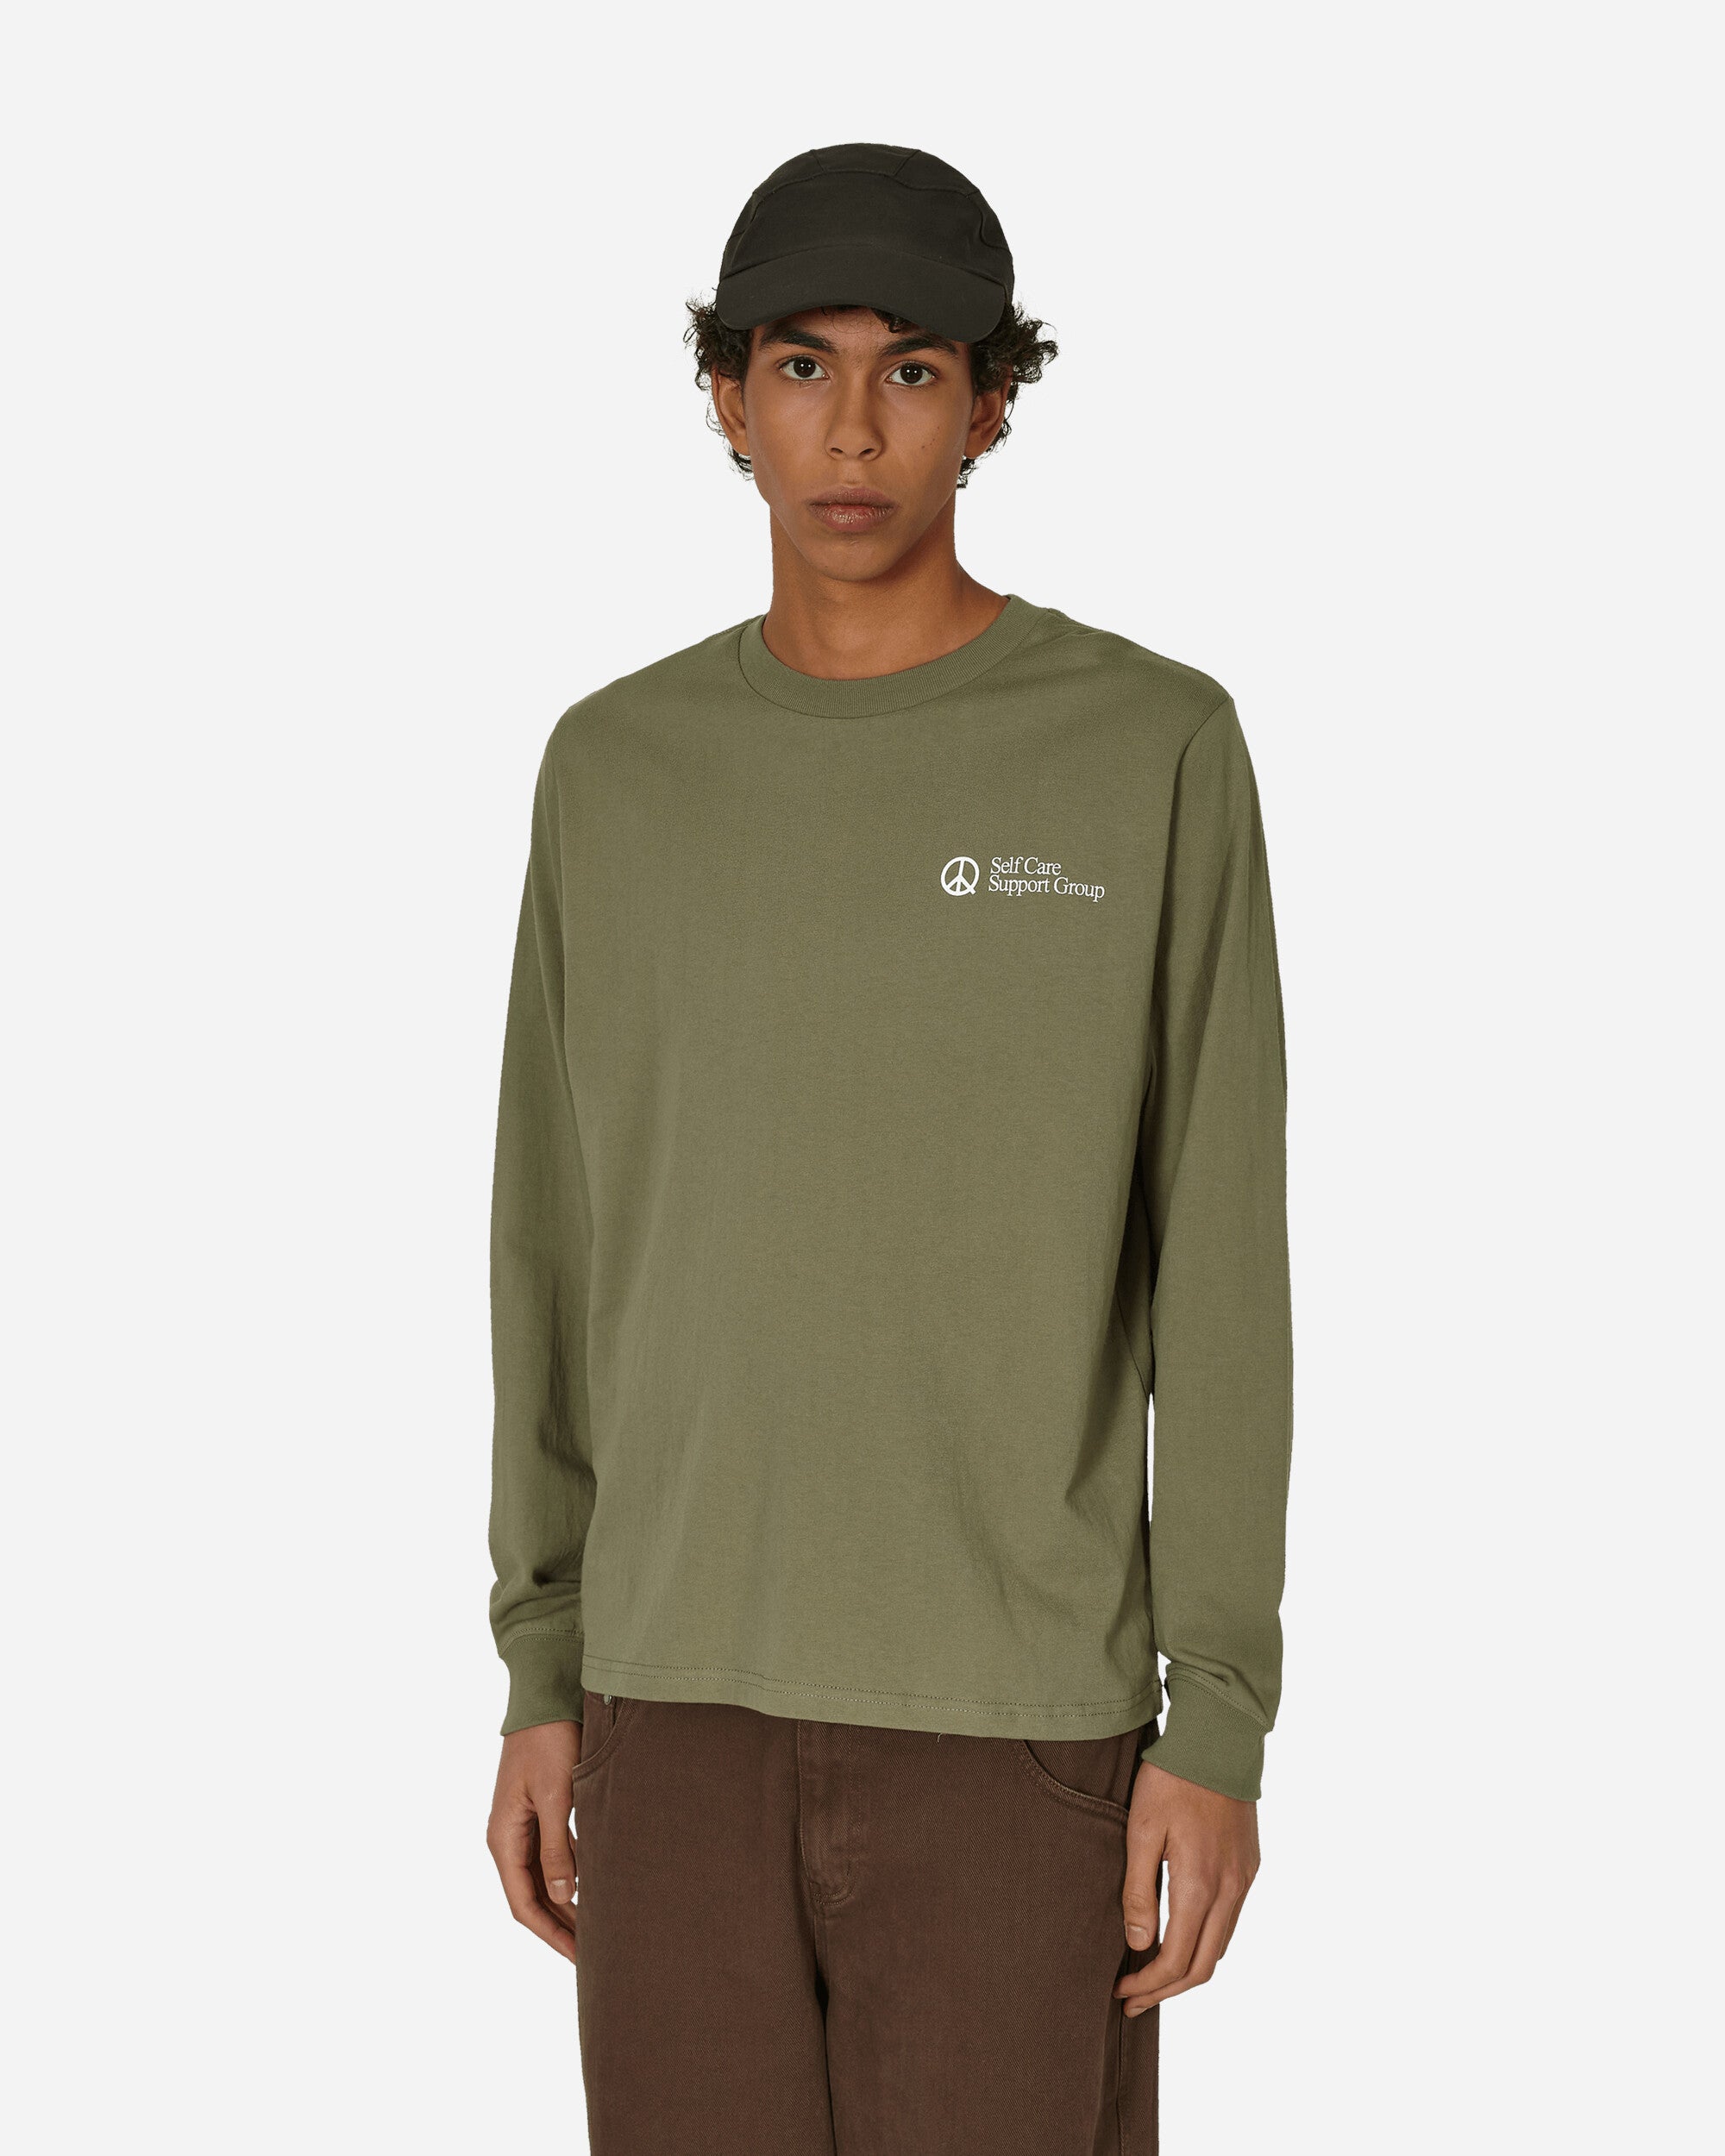 Museum of Peace & Quiet Support Group Longsleeve T-Shirt Olive